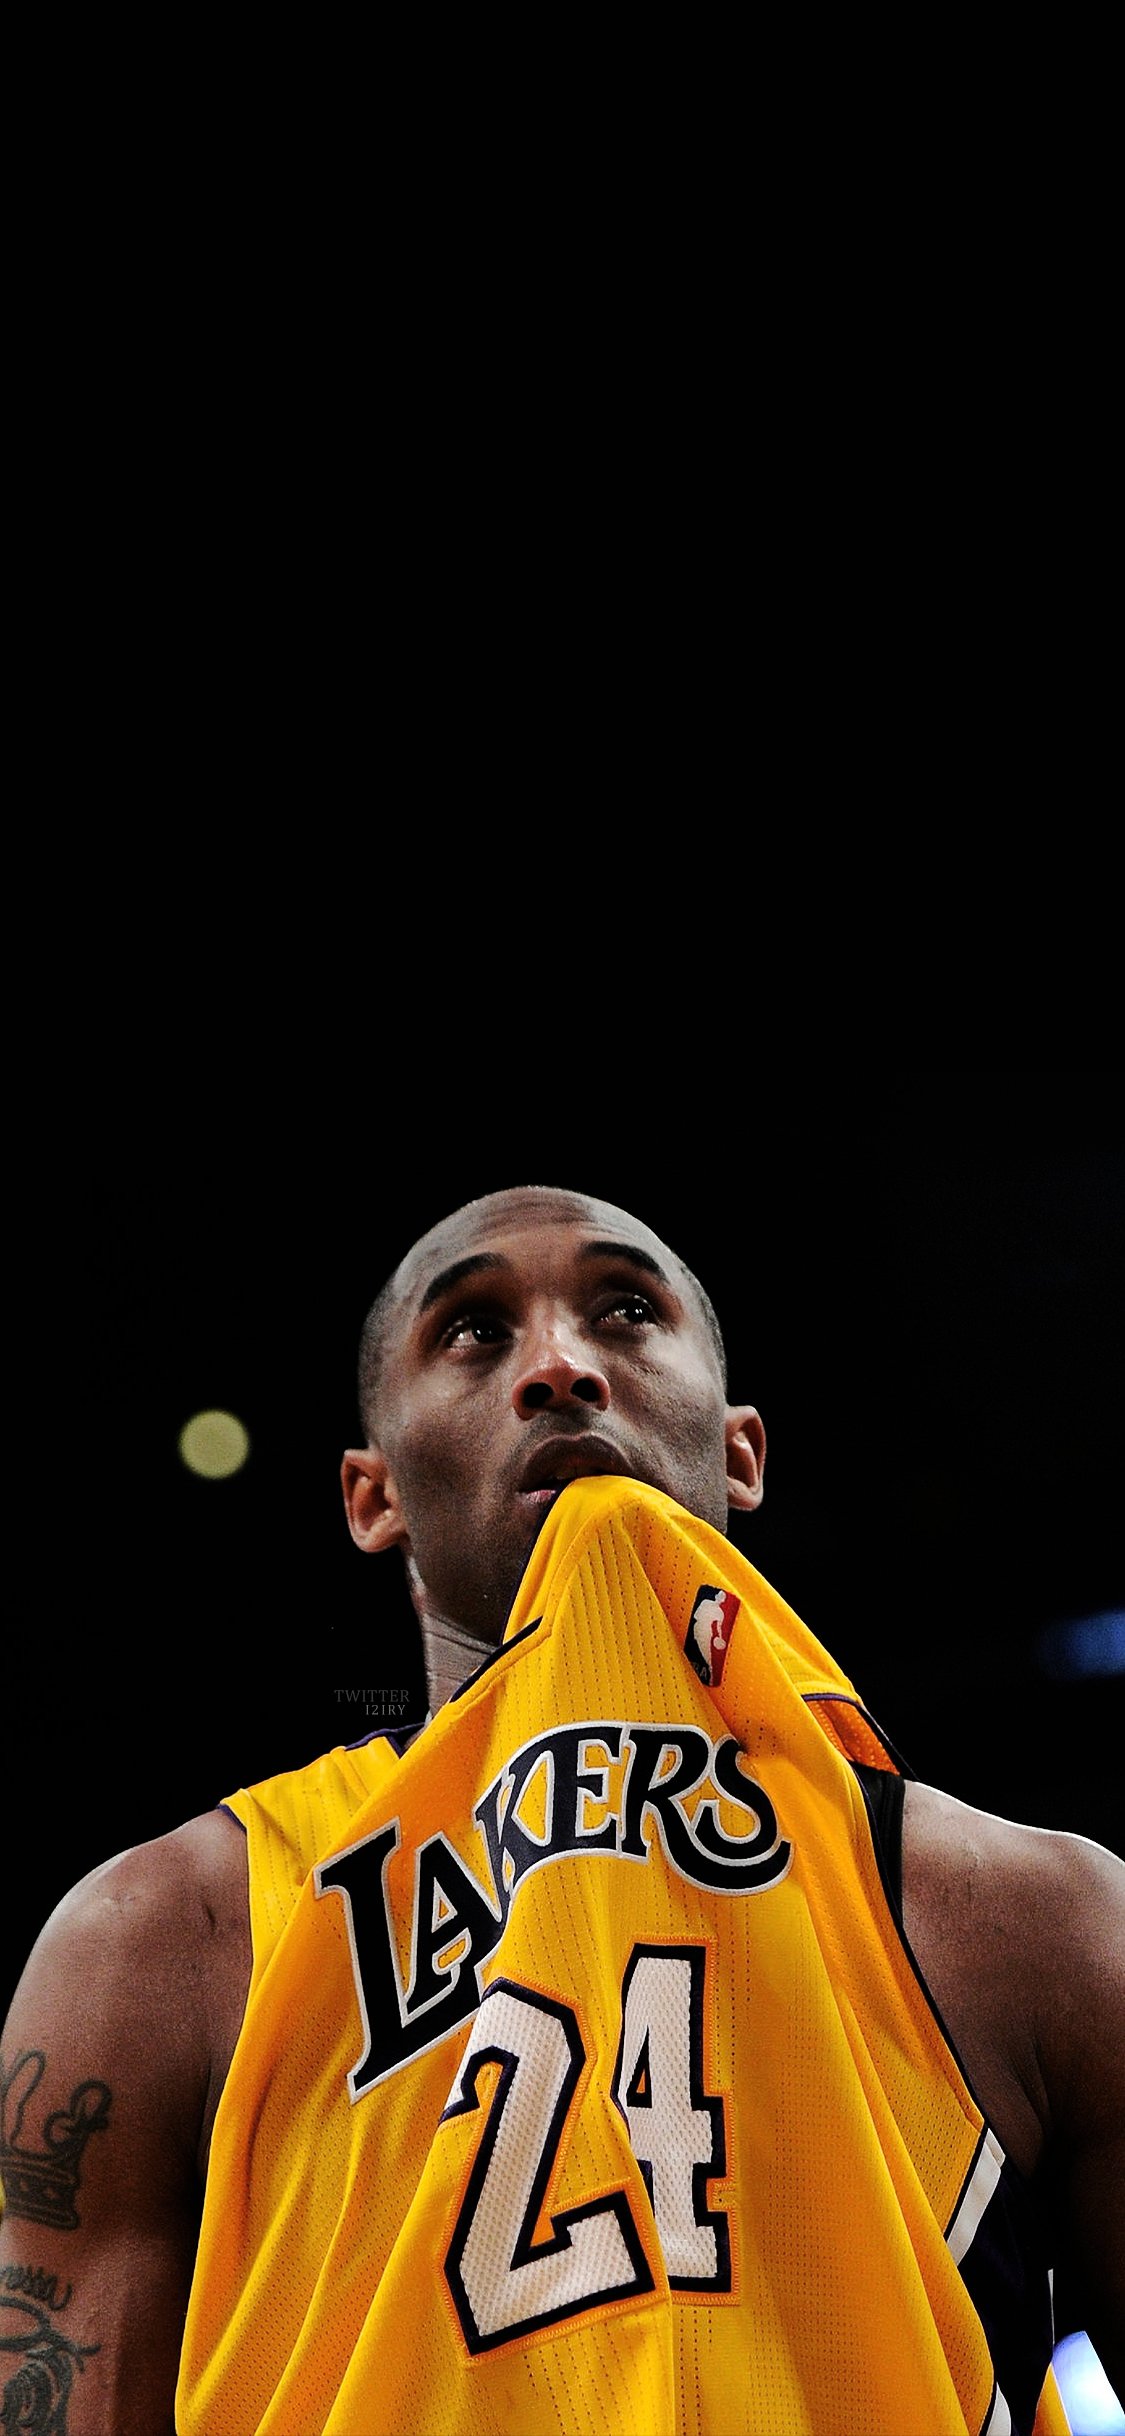 HoopsWallpapers.com – Get the latest HD and mobile NBA wallpapers today!  Kobe Bryant Archives - HoopsWallpapers.com - Get the latest HD and mobile  NBA wallpapers today!